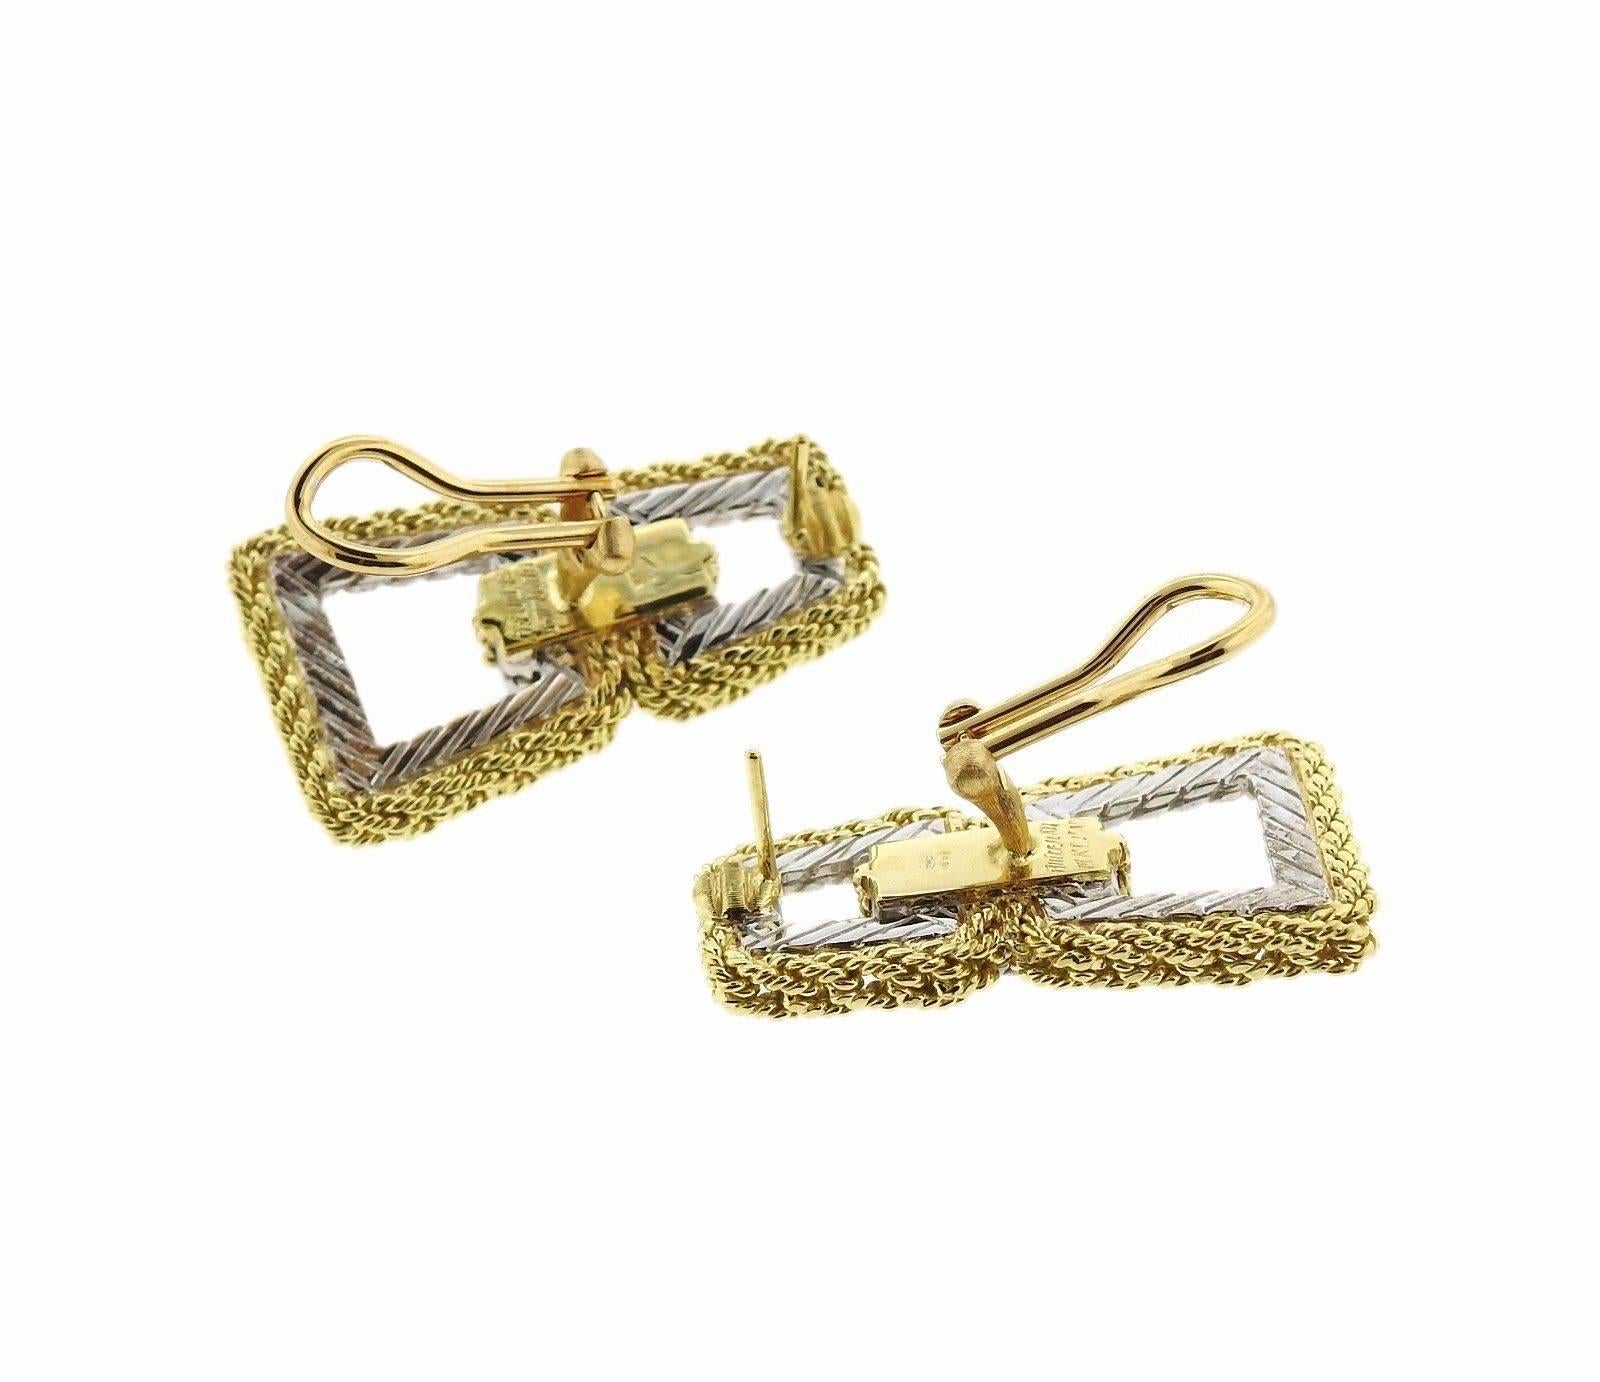 A pair of 18k yellow and white gold earrings measuring 32mm x 20mm.  The weight of the pair is 27.8 grams.  Marked: 18k, Italy, Buccellati.  The retail for the pair is $9310.